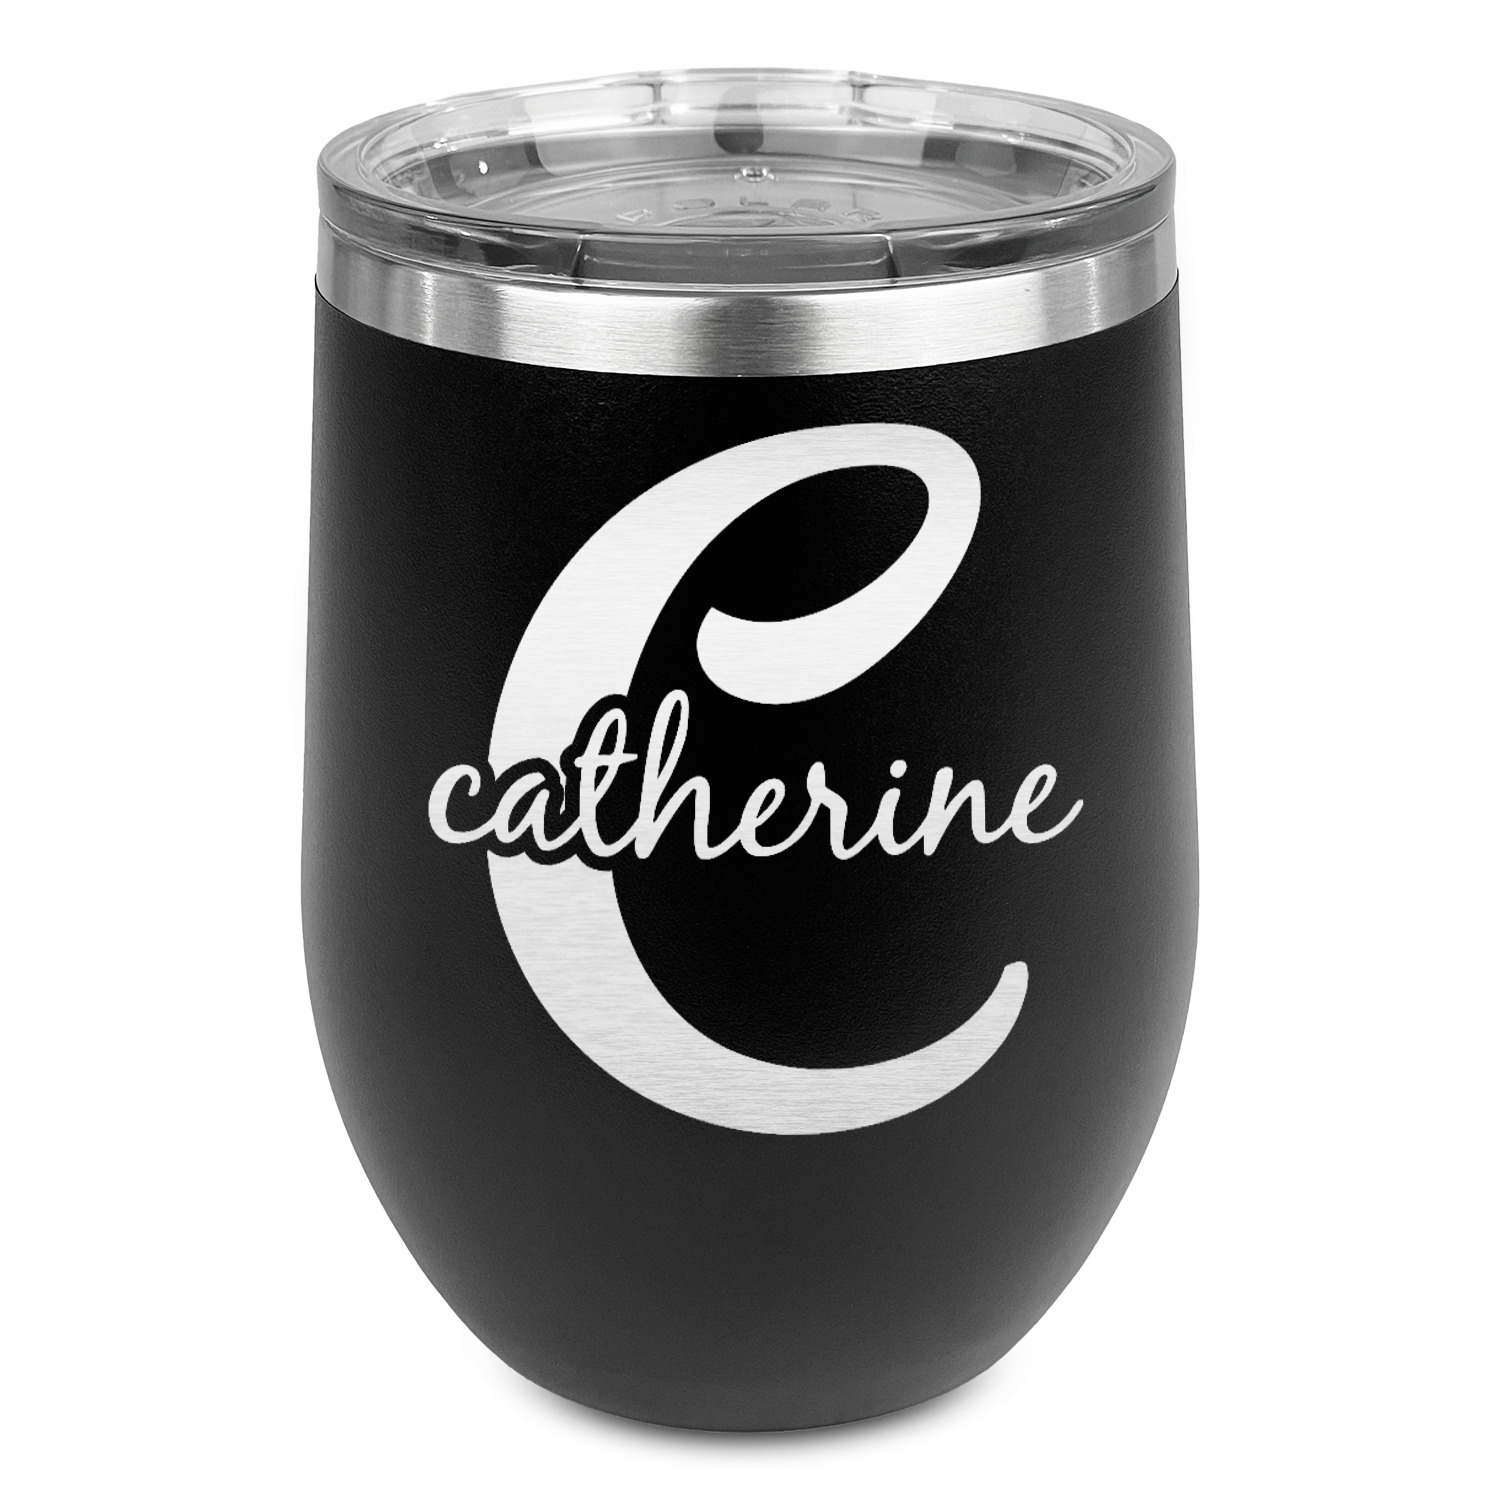 https://www.youcustomizeit.com/common/MAKE/837763/Name-Initial-Girly-Stainless-Wine-Tumblers-Black-Single-Sided-Front.jpg?lm=1644253483